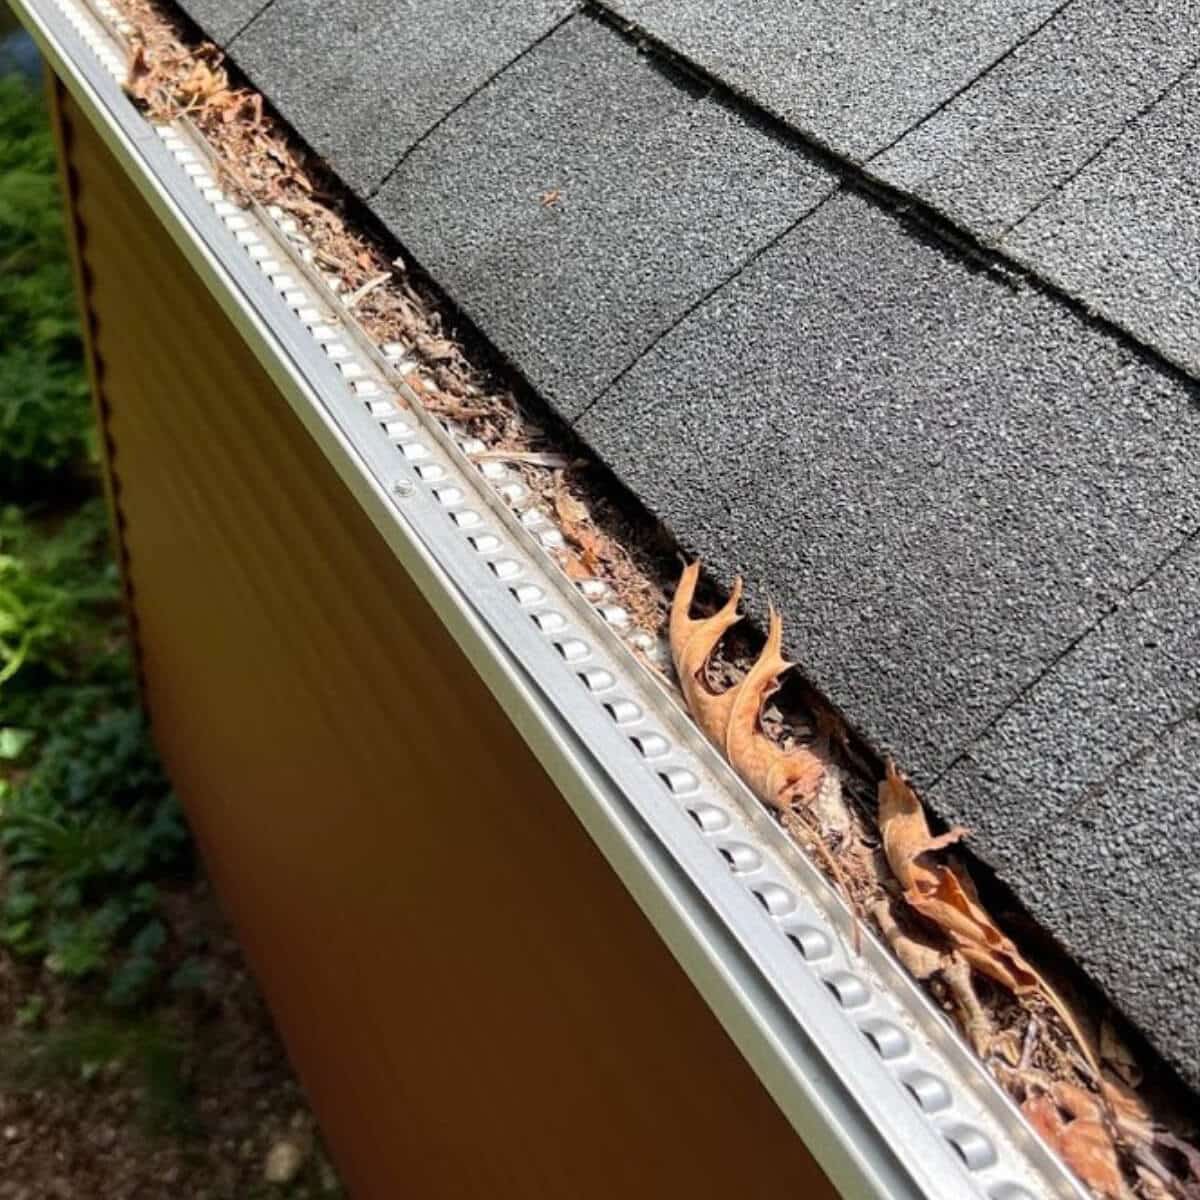 clogged gutter needing expert gutter cleaning service in bethlehem pa